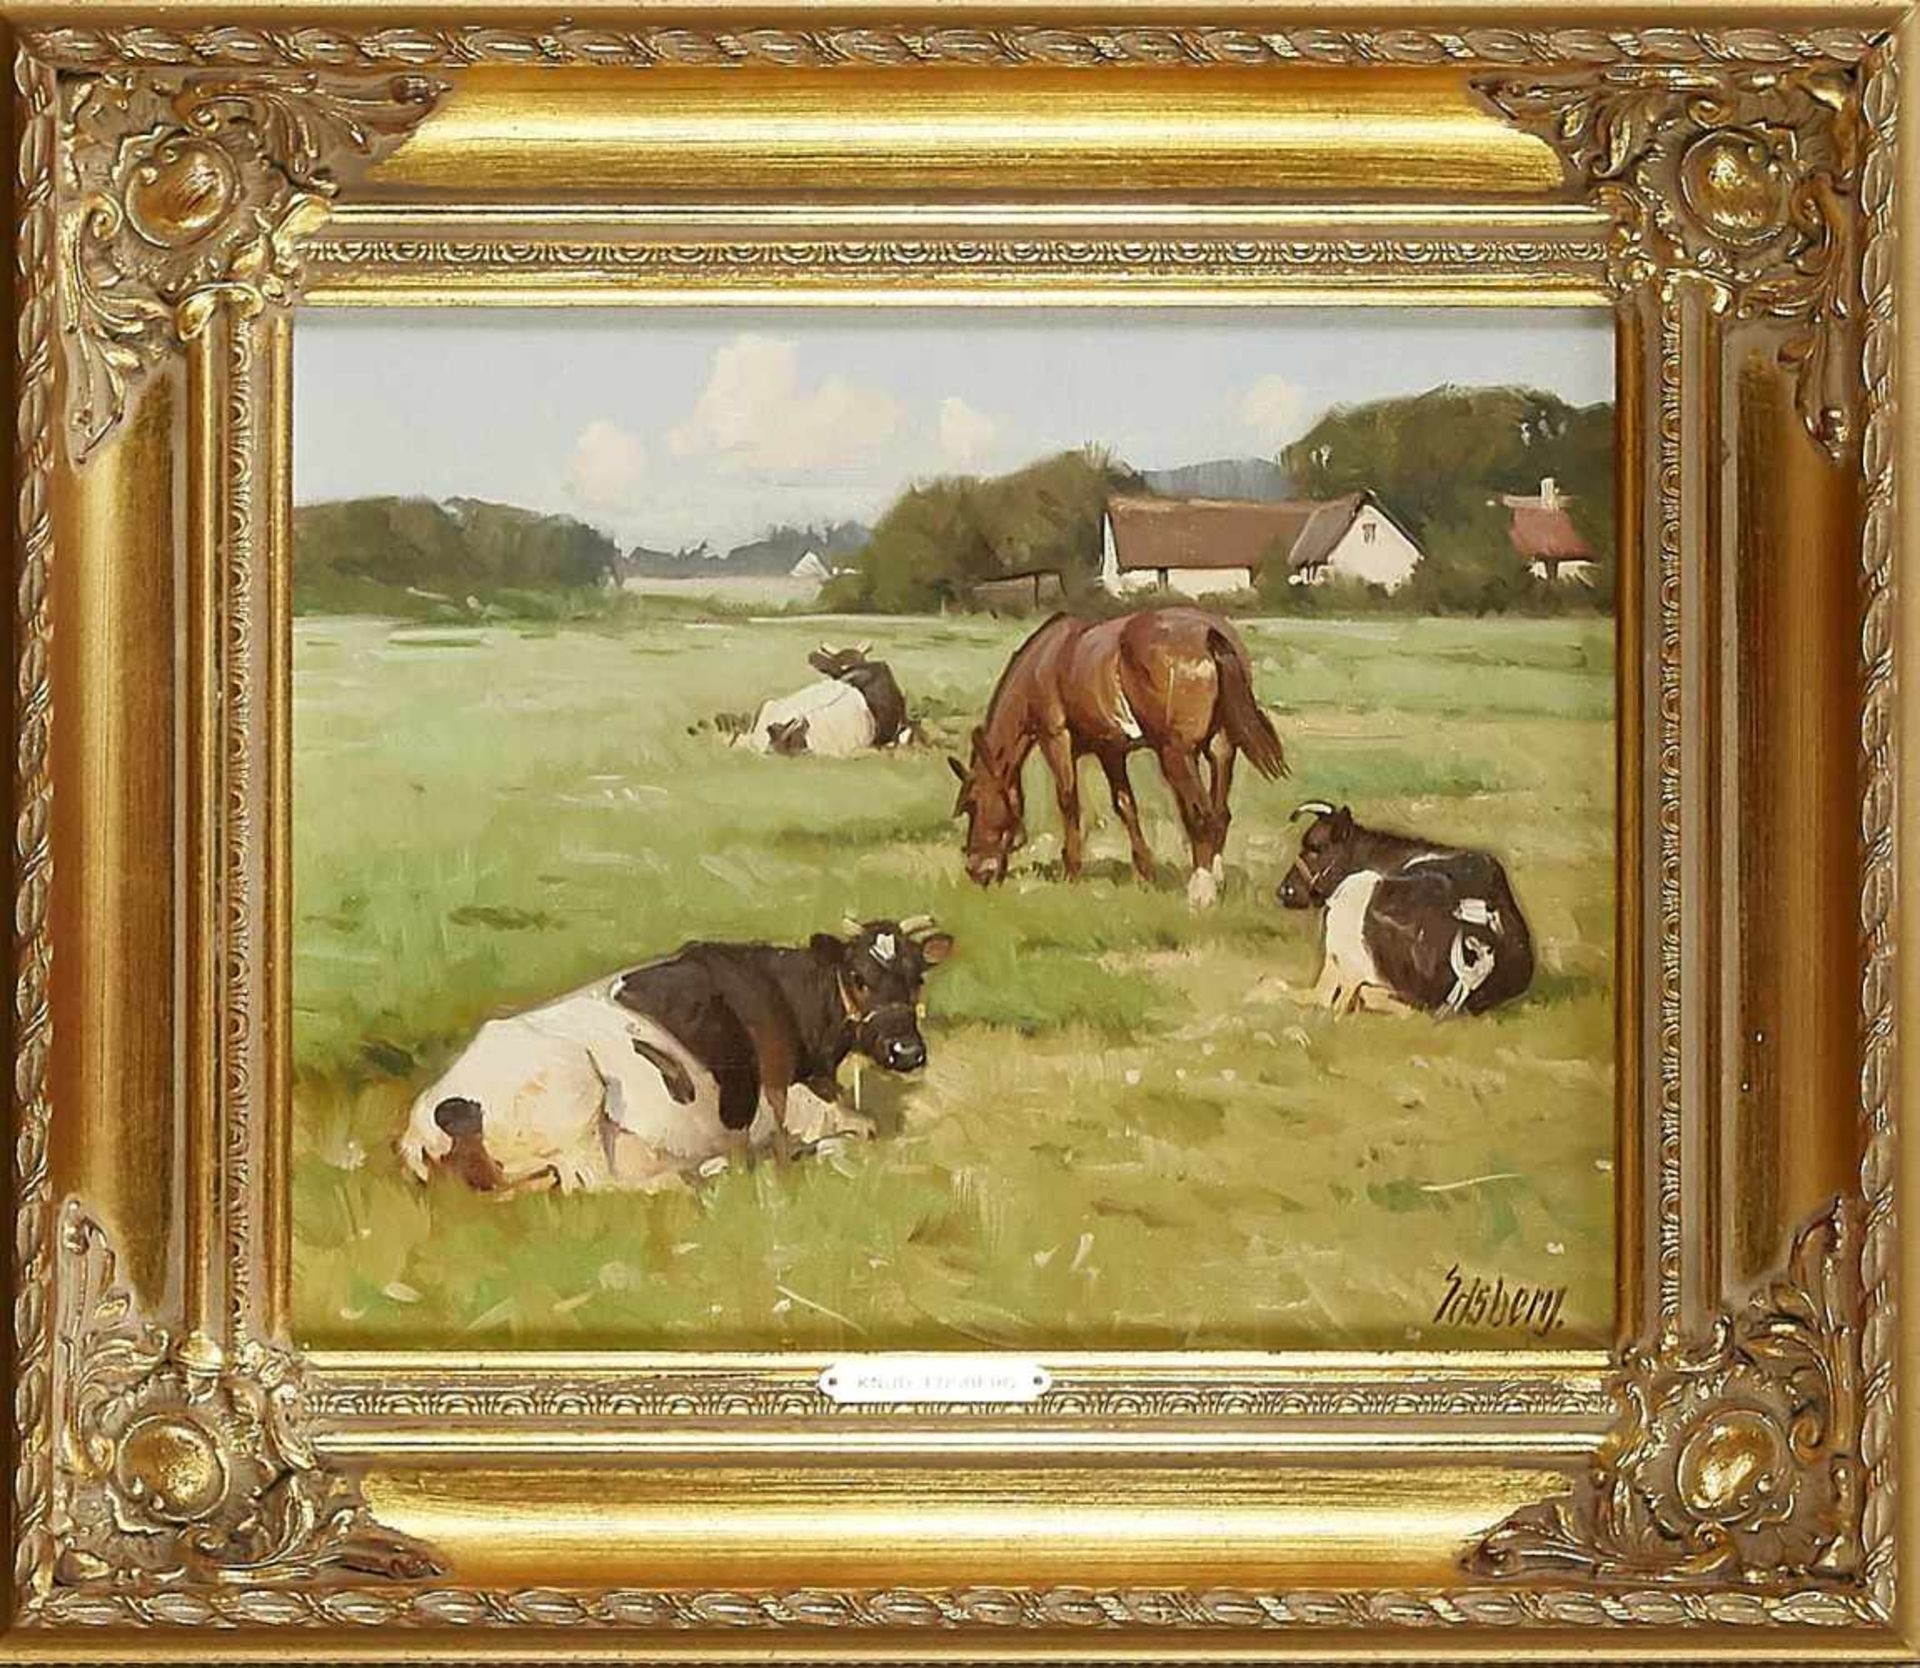 Knud Edsberg (born 1945), Danish landscape and genre painter, grazing cows and horse in